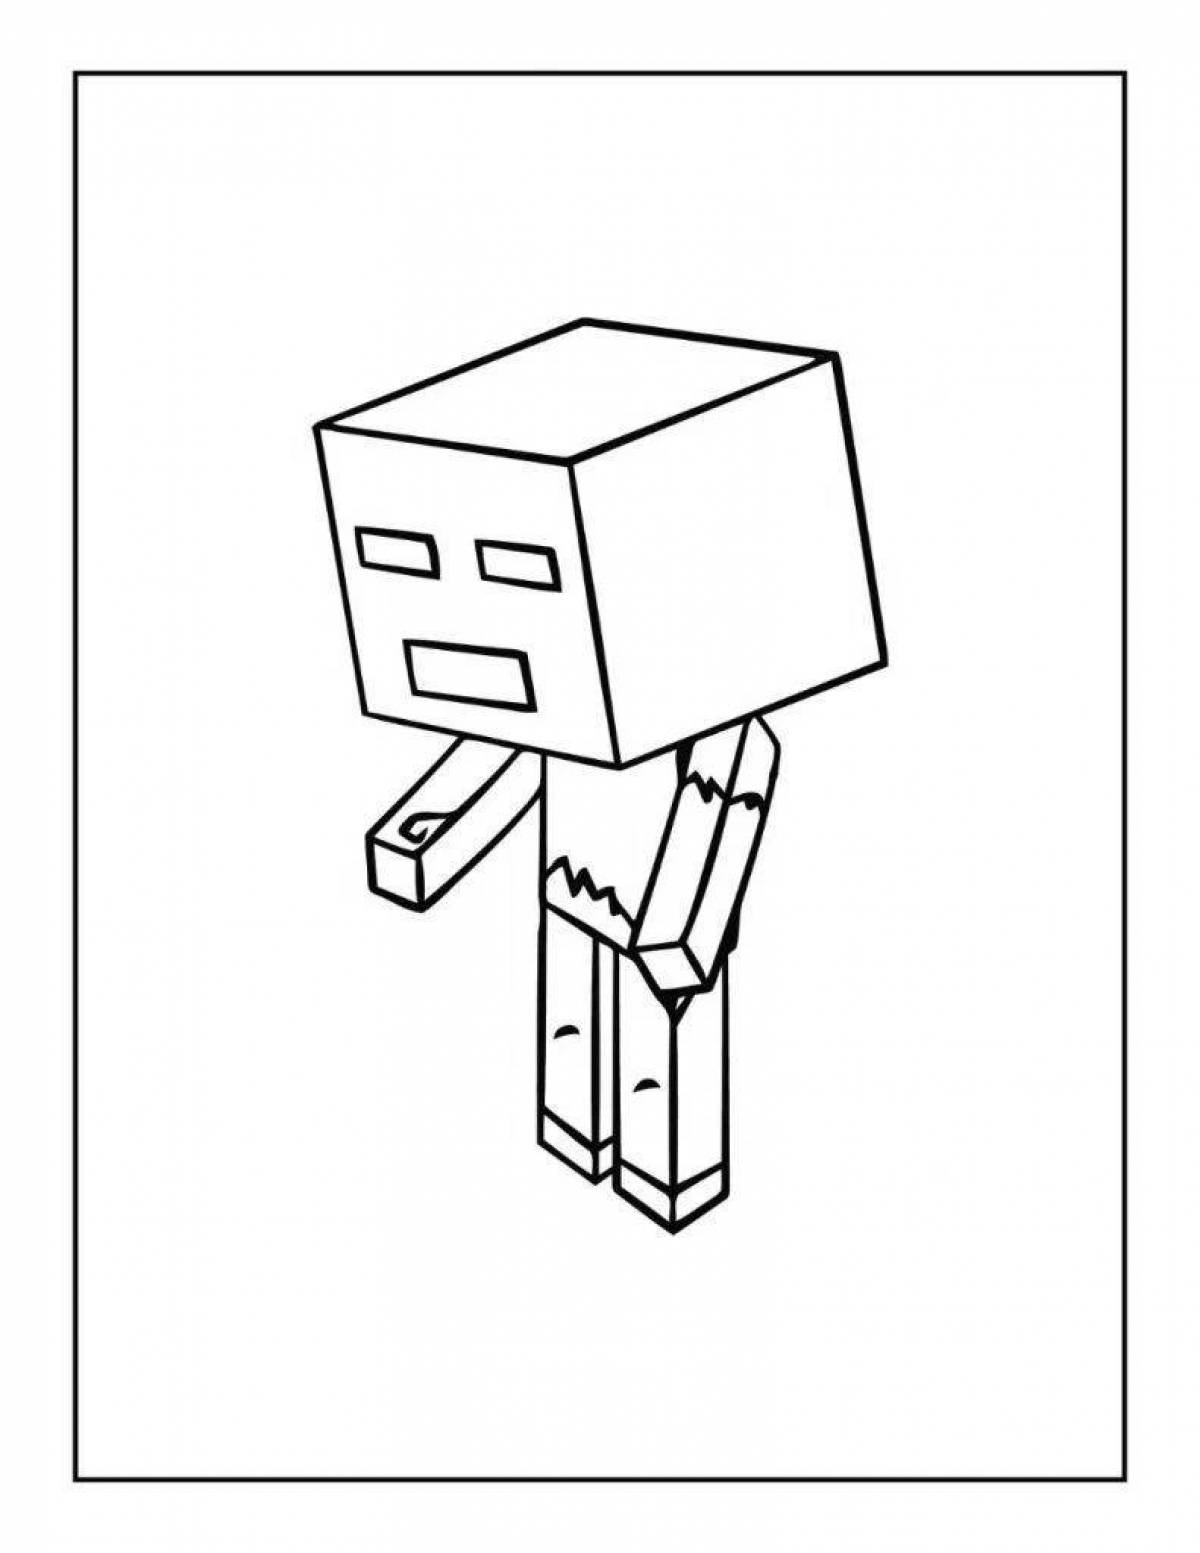 Playful minecraft workbench coloring page